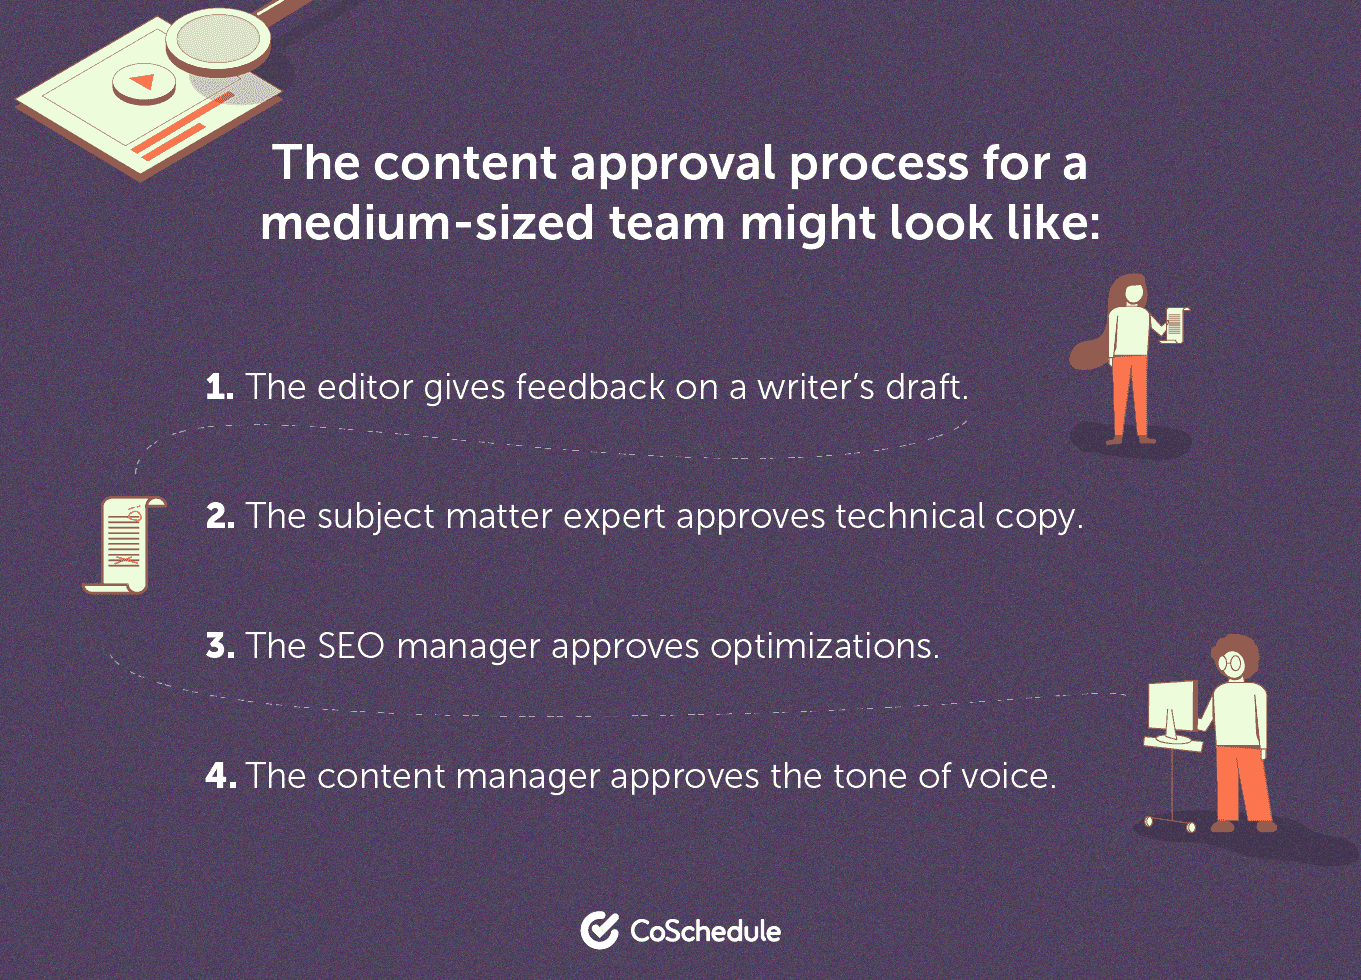 Content approval process for teams